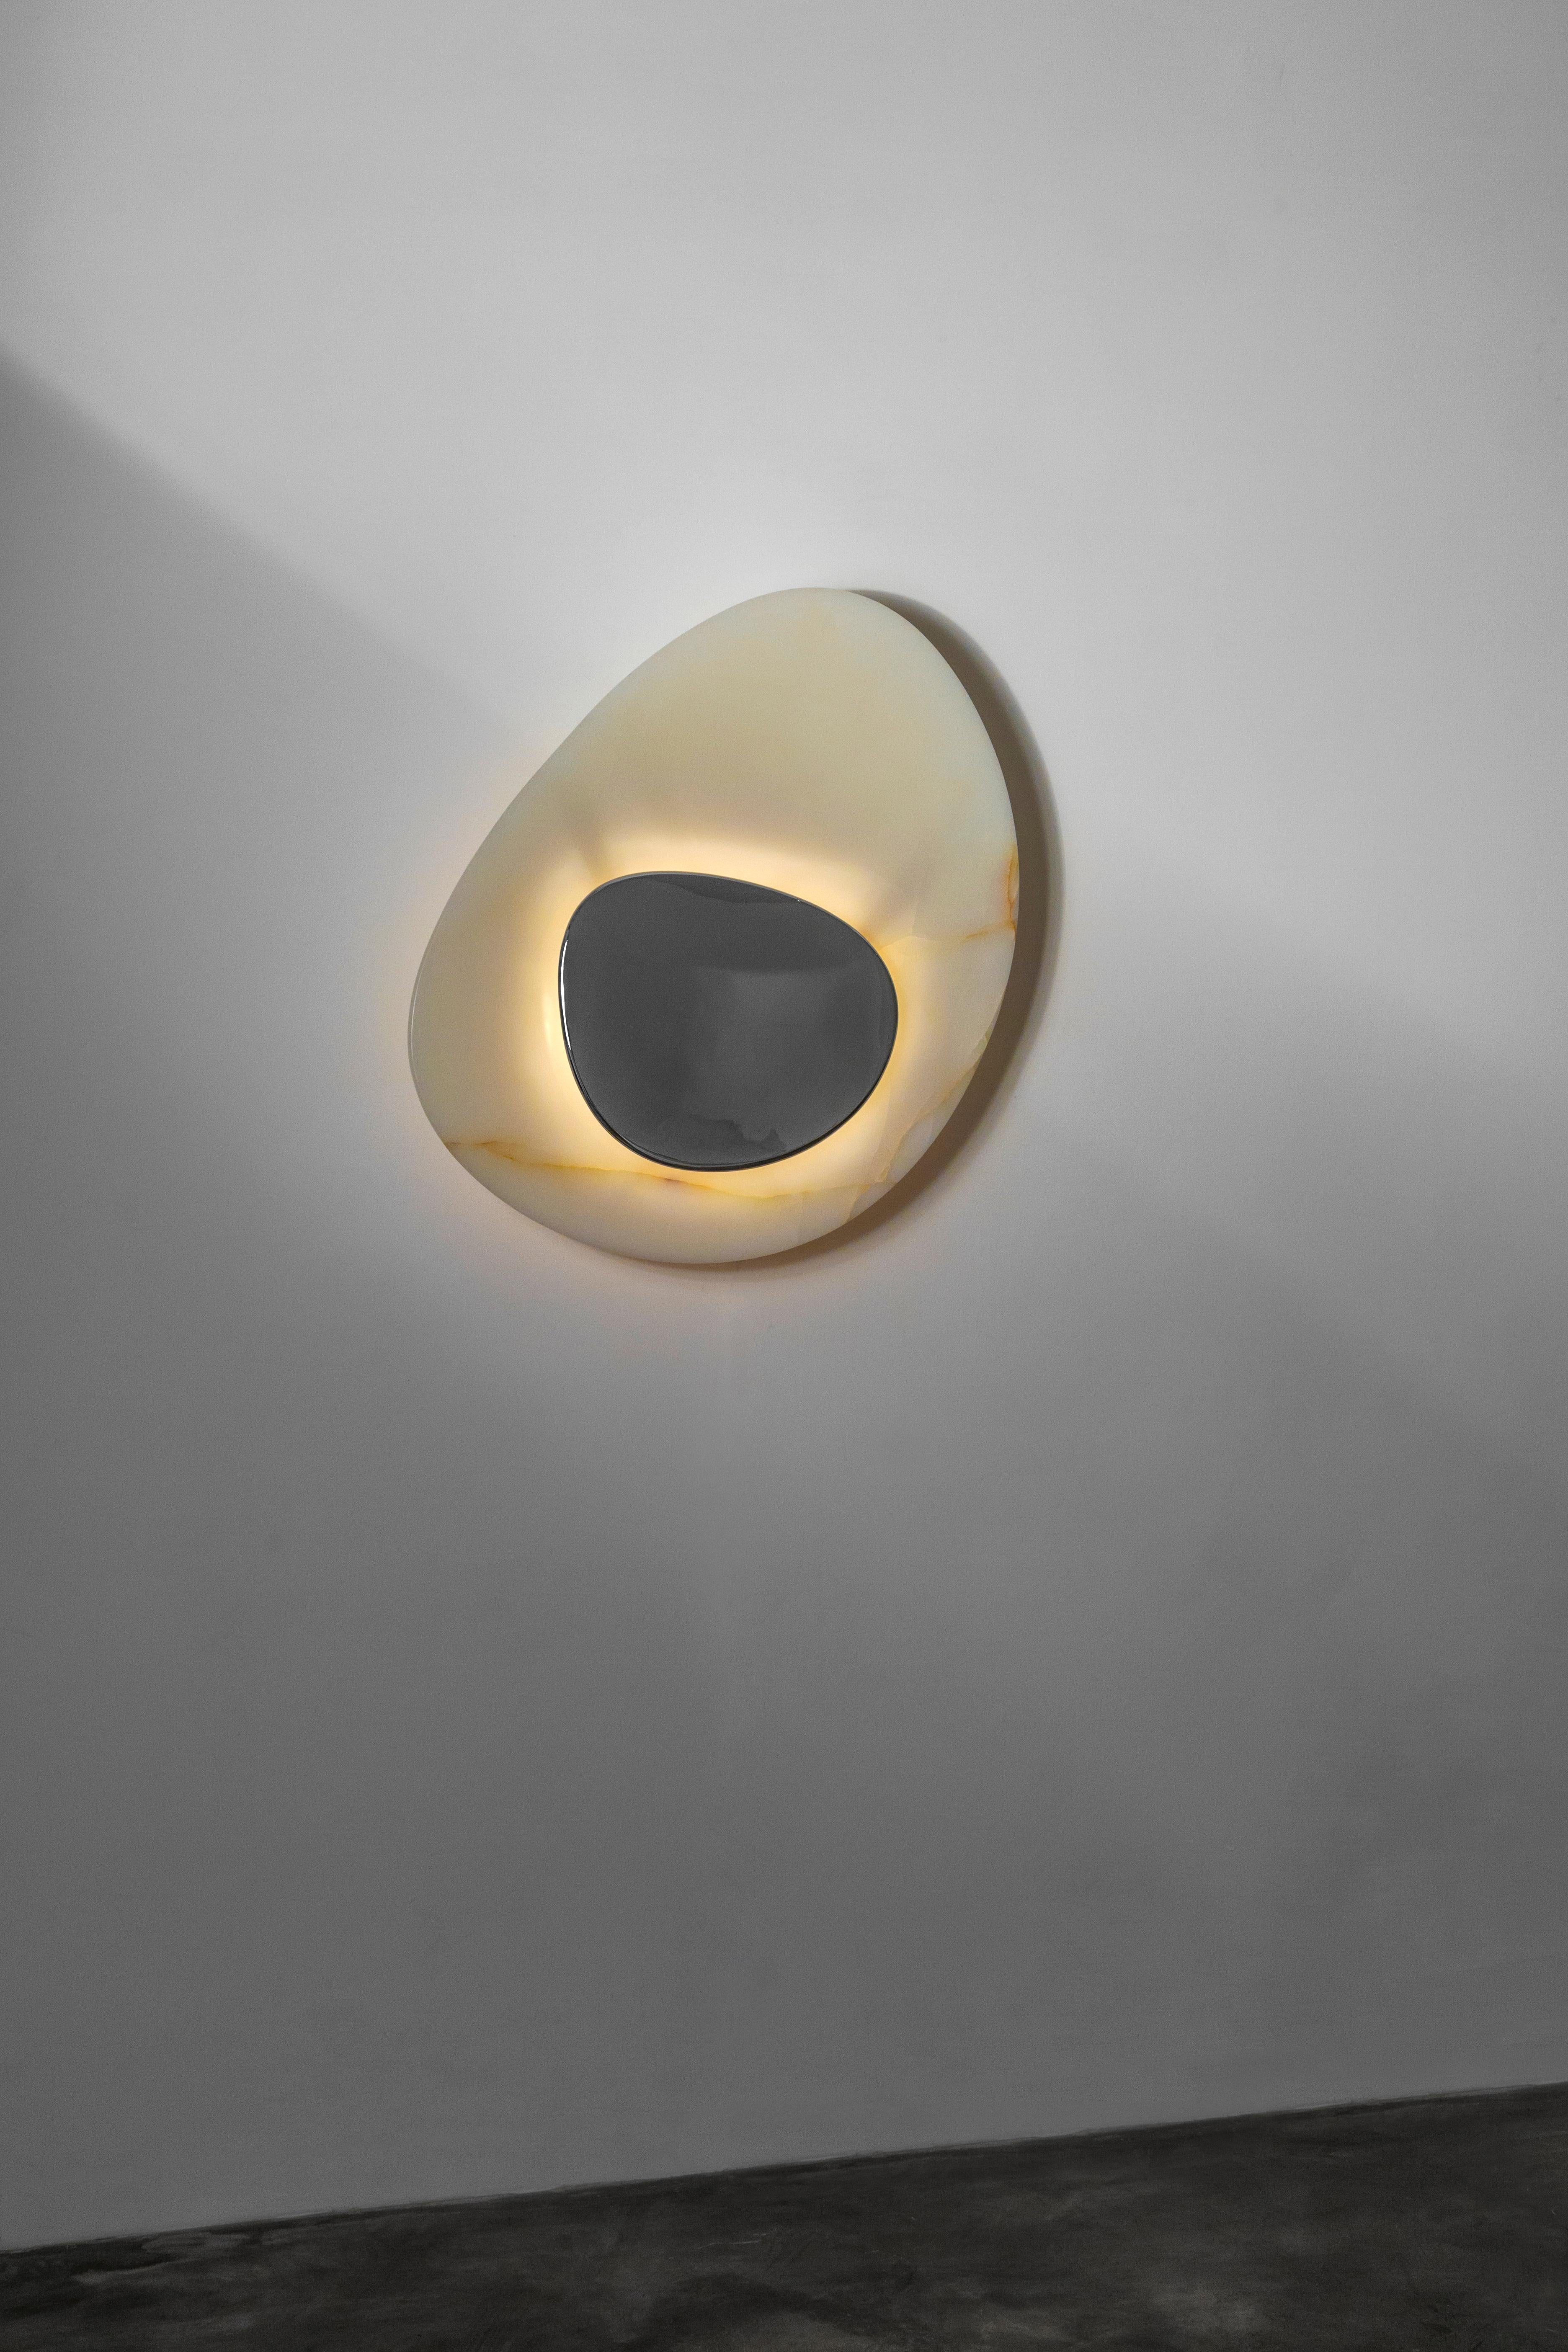 This piece, one of a limited edition of six, is made up of an oblong mirror set in a beautifully veined concave piece of onyx.